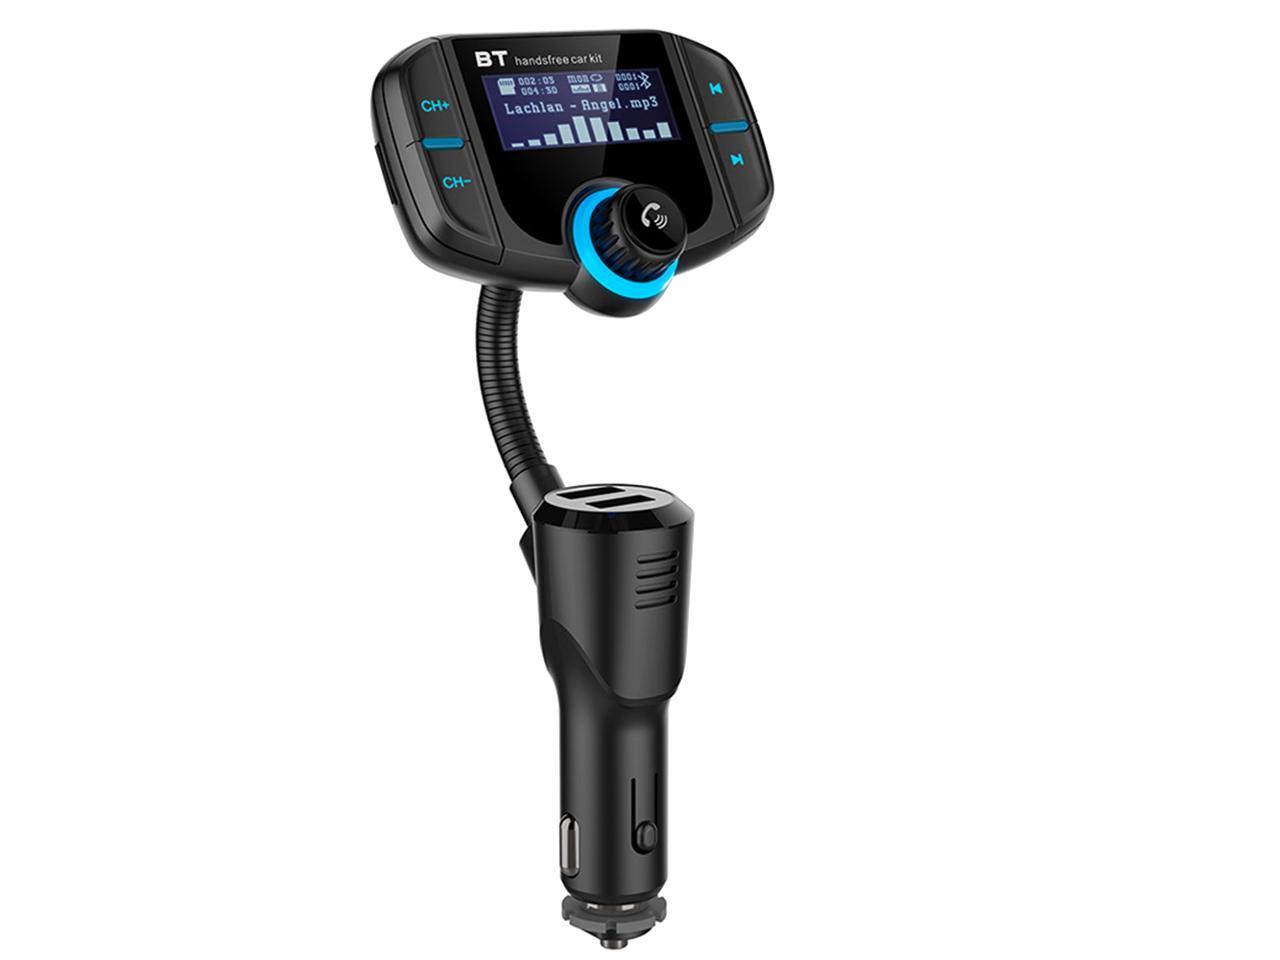 Sumind Car Bluetooth FM Transmitter Upgraded Version AUX Output Golden TF Card Mp3 Player QC3.0 and Smart 2.4A USB Ports Wireless Radio Adapter Hands-Free Kit with 1.7 Inch Display 